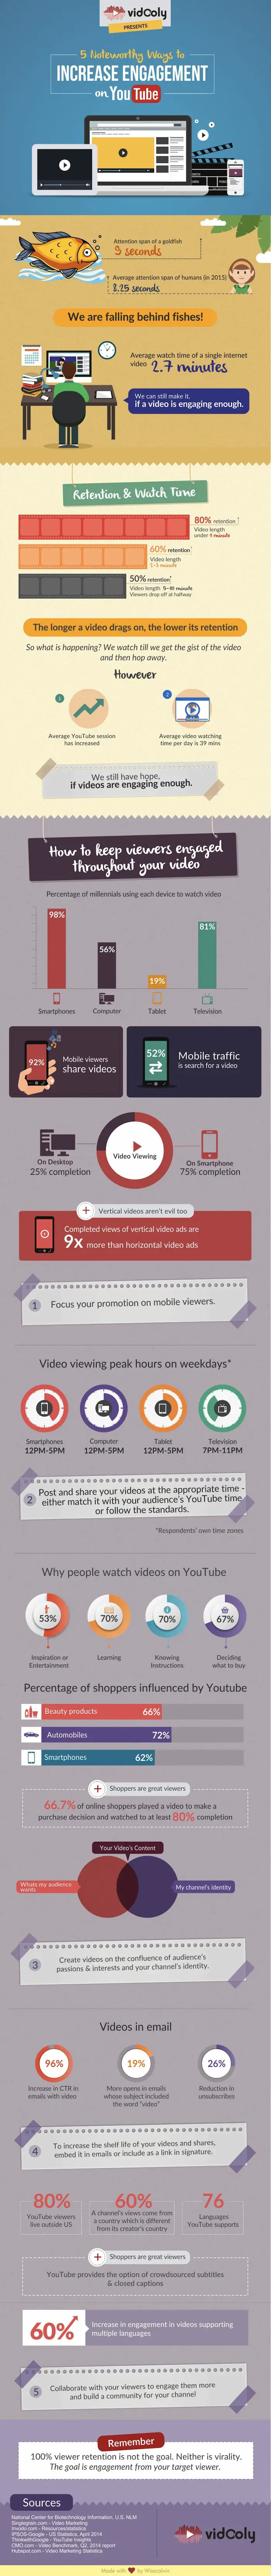 wersm-infographic-youtube-tips-for-more-engagement